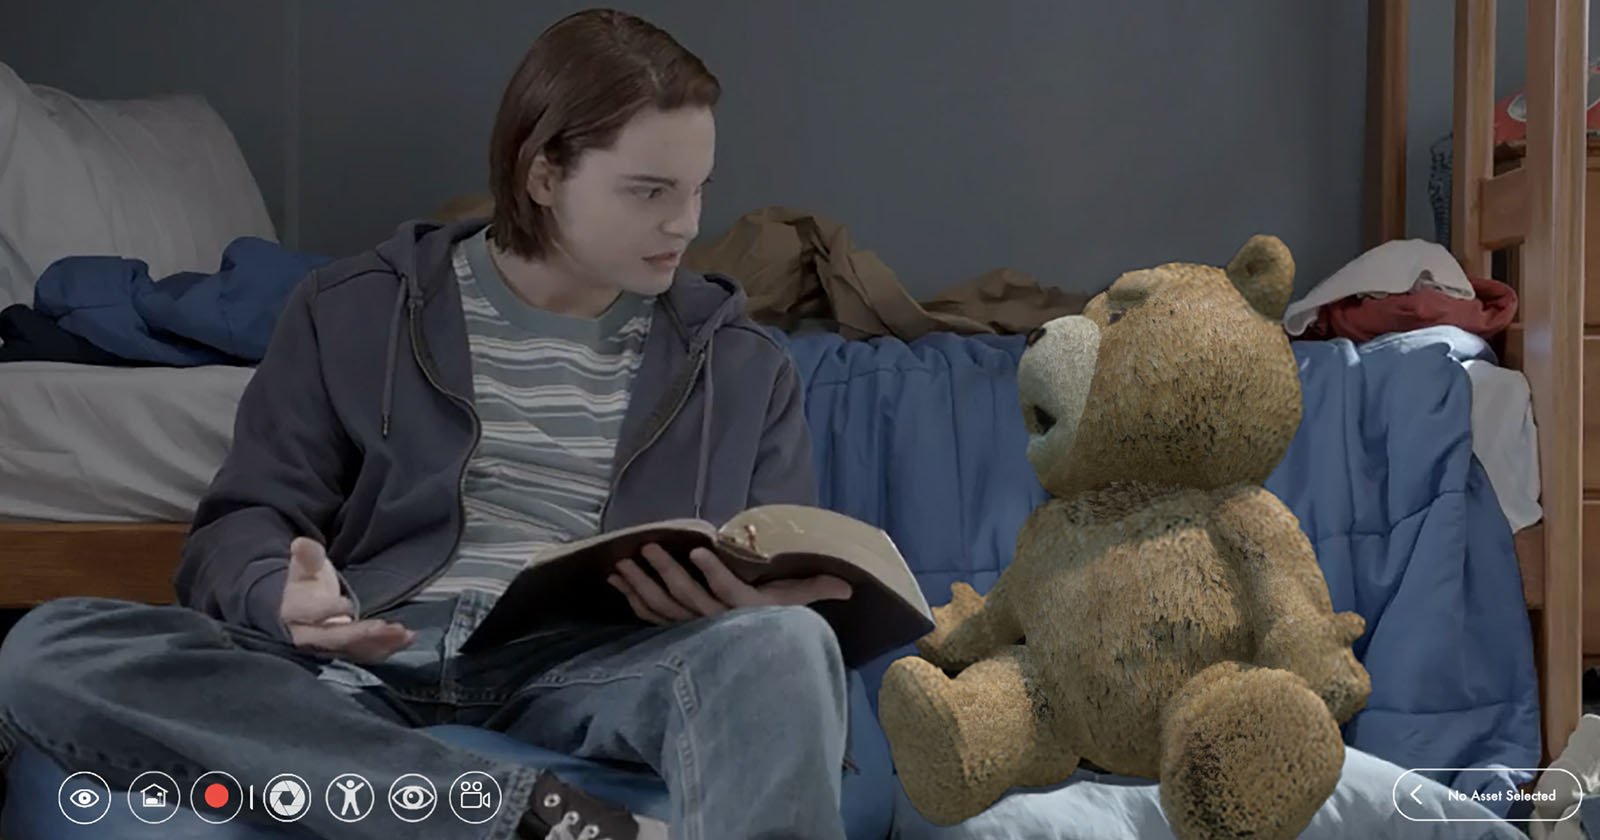 Incredible Tech Brings Ted, the Trash-Talking Teddy Bear, into the Viewfinder